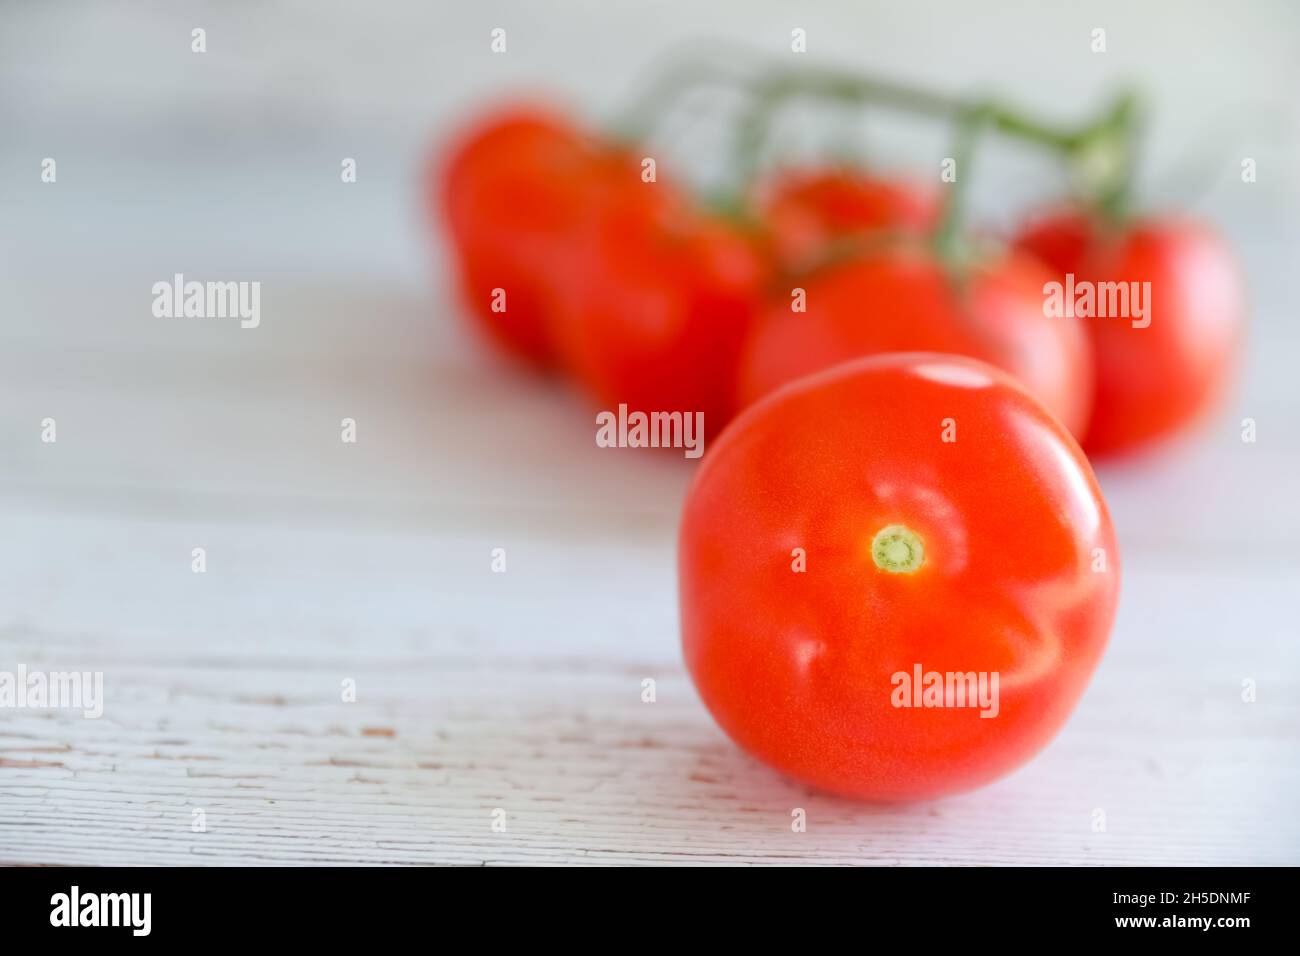 Freshly picked home grown organic vine ripened healthy tomatoes. Stock Photo